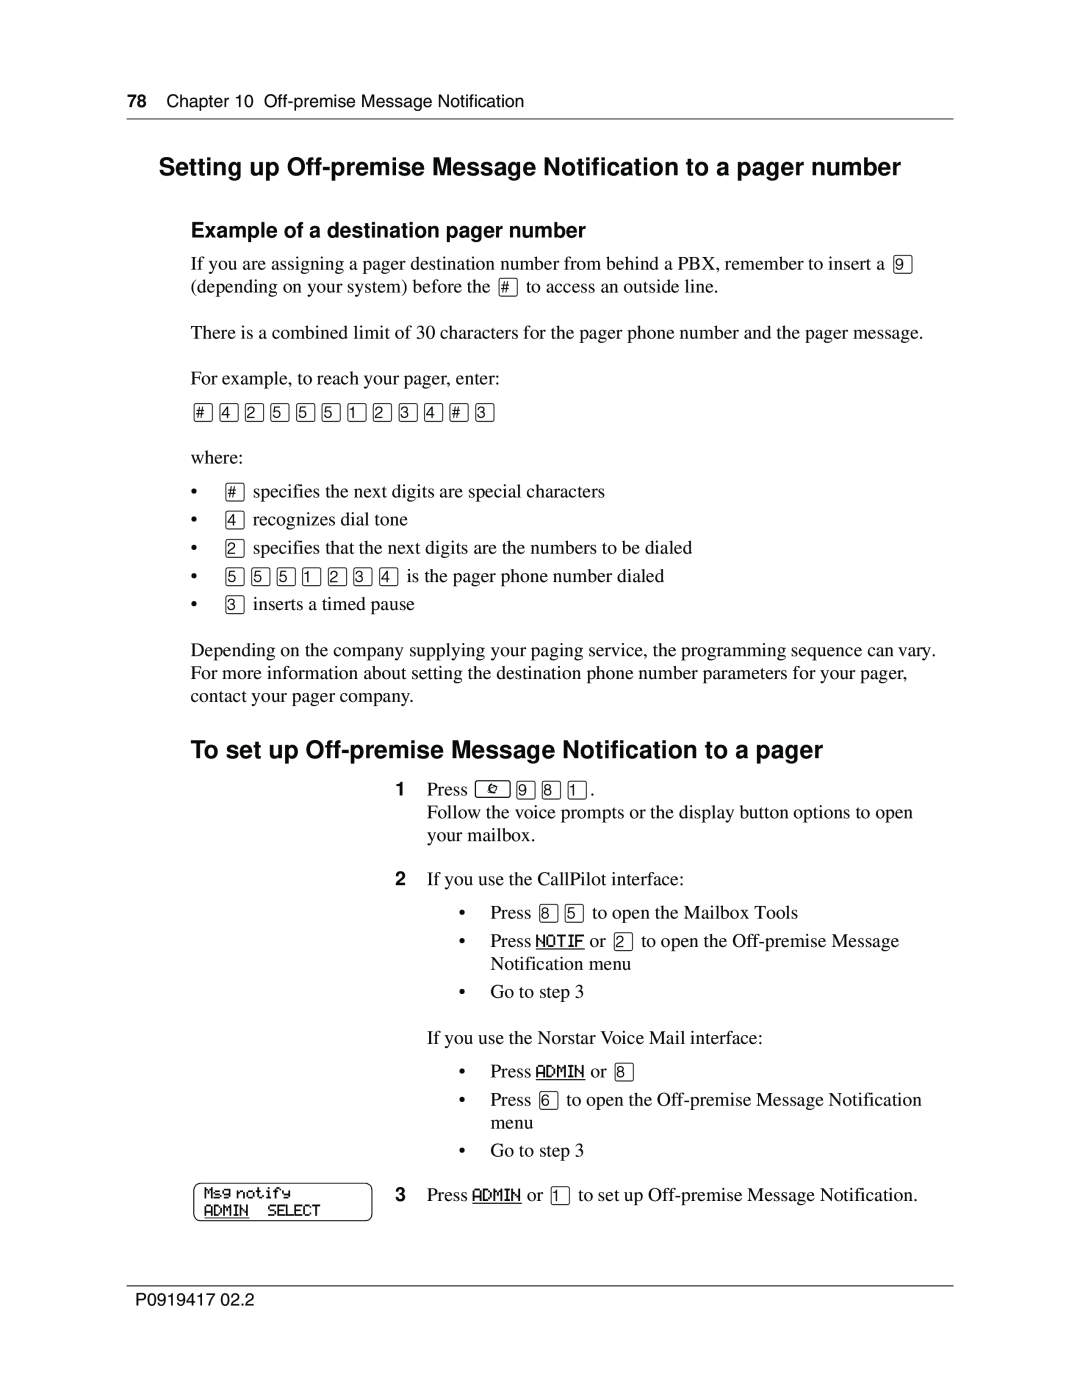 Nortel Networks CallPilot manual Setting up Off-premise Message Notification to a pager number 